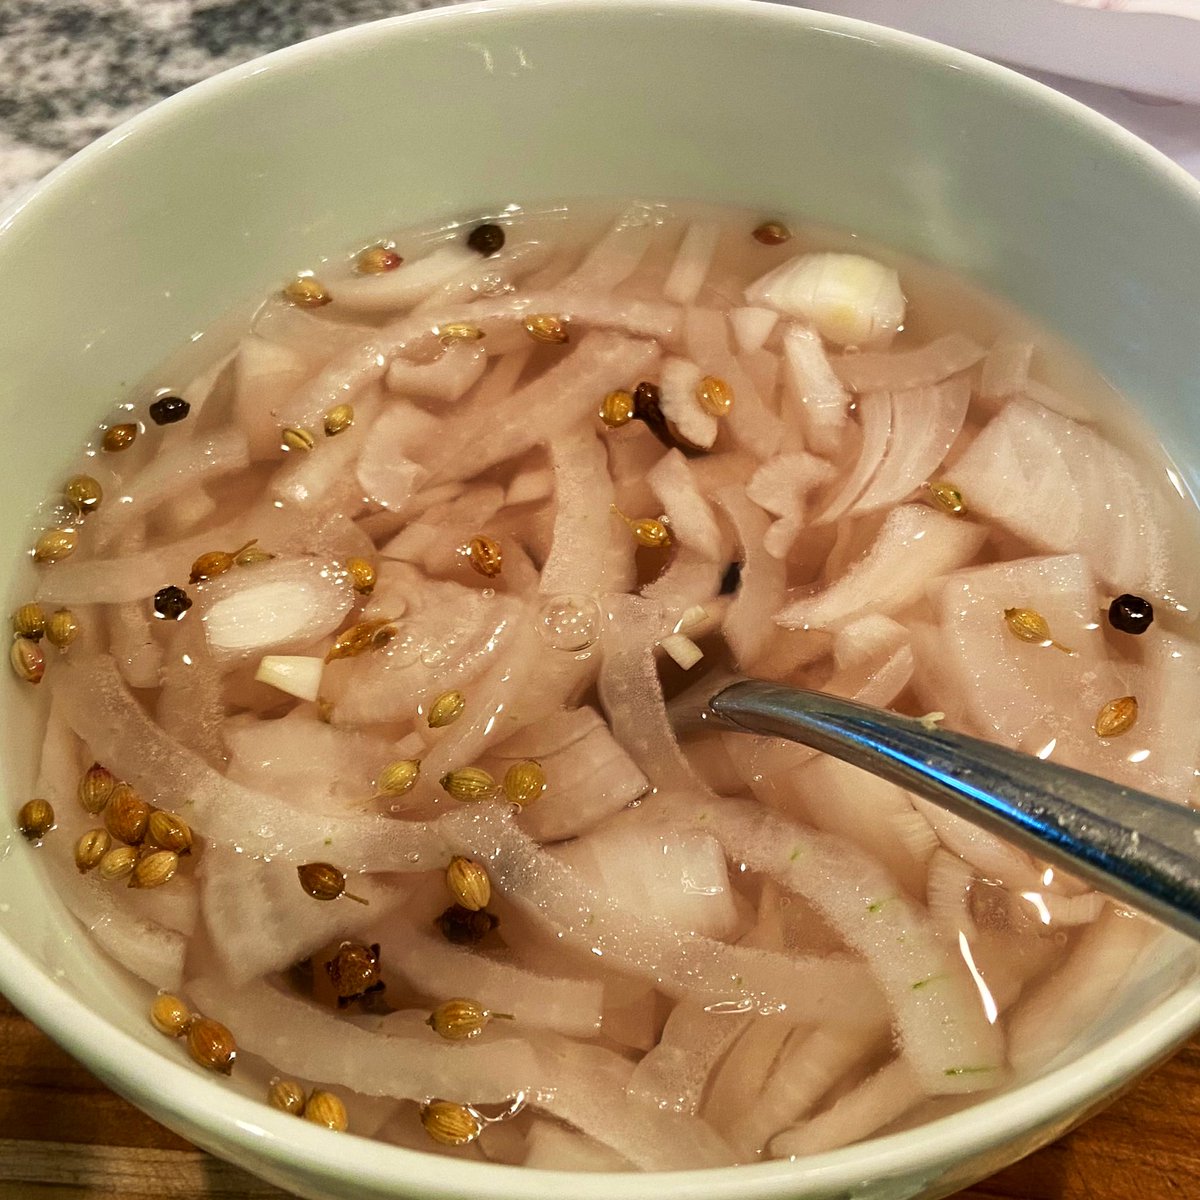 This is going to need some tang. So I make some quick pickled onions, toss it in with the chopped sardines, add some capers, and fresh grind some black pepper.I have the undivided attention of both kids. They ask to eat some coriander seeds and like it so I know they’re hungry.